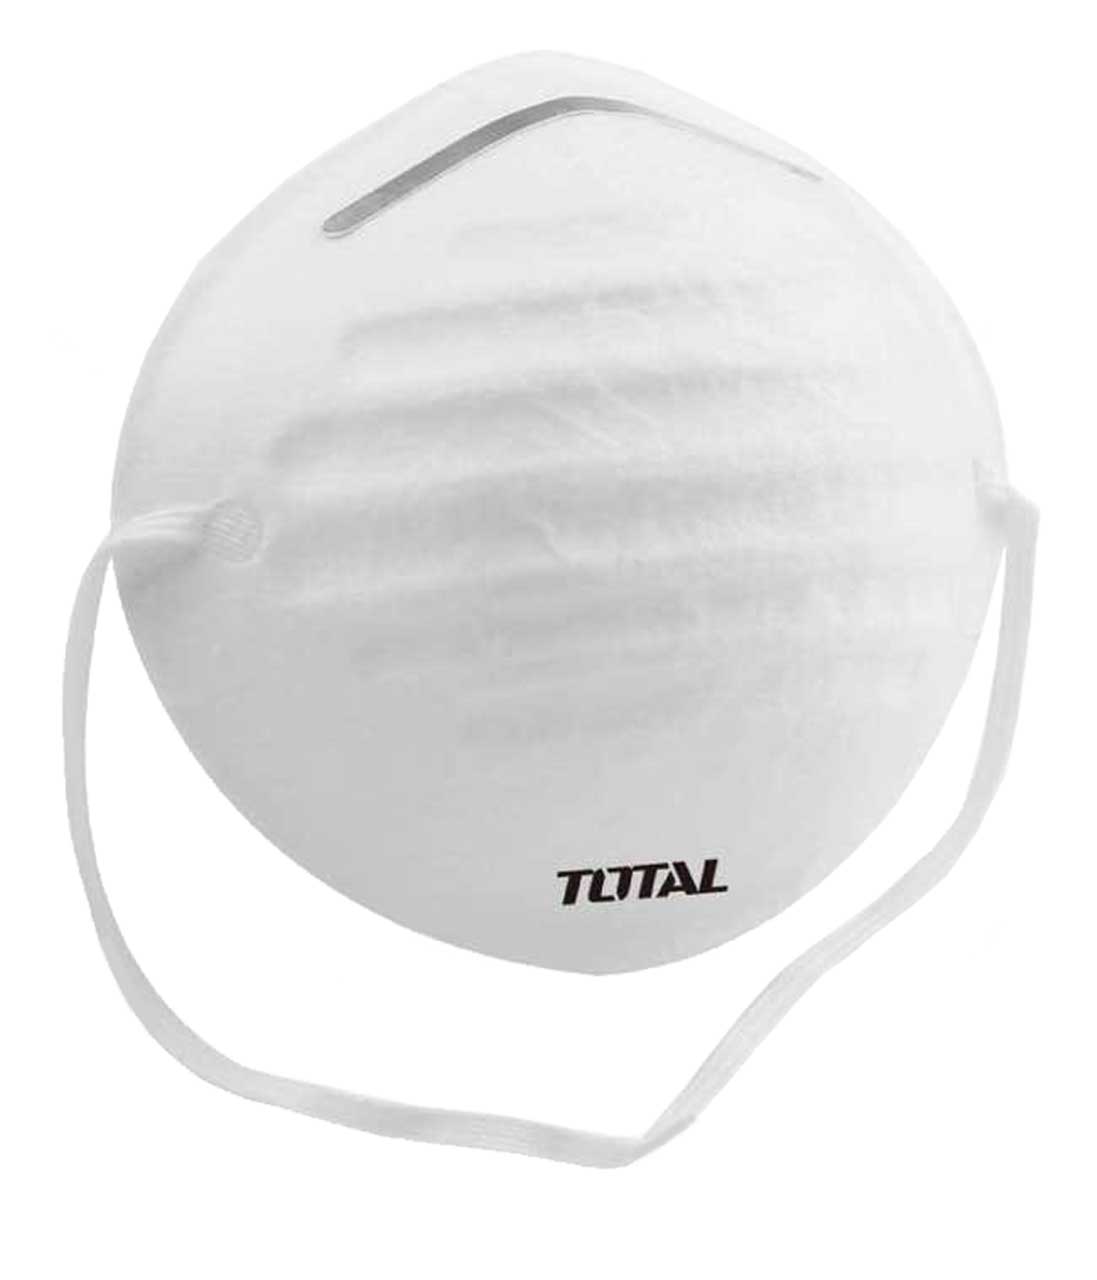 Total Dust Mask - TSP403 | Supply Master | Accra, Ghana Tools Building Steel Engineering Hardware tool